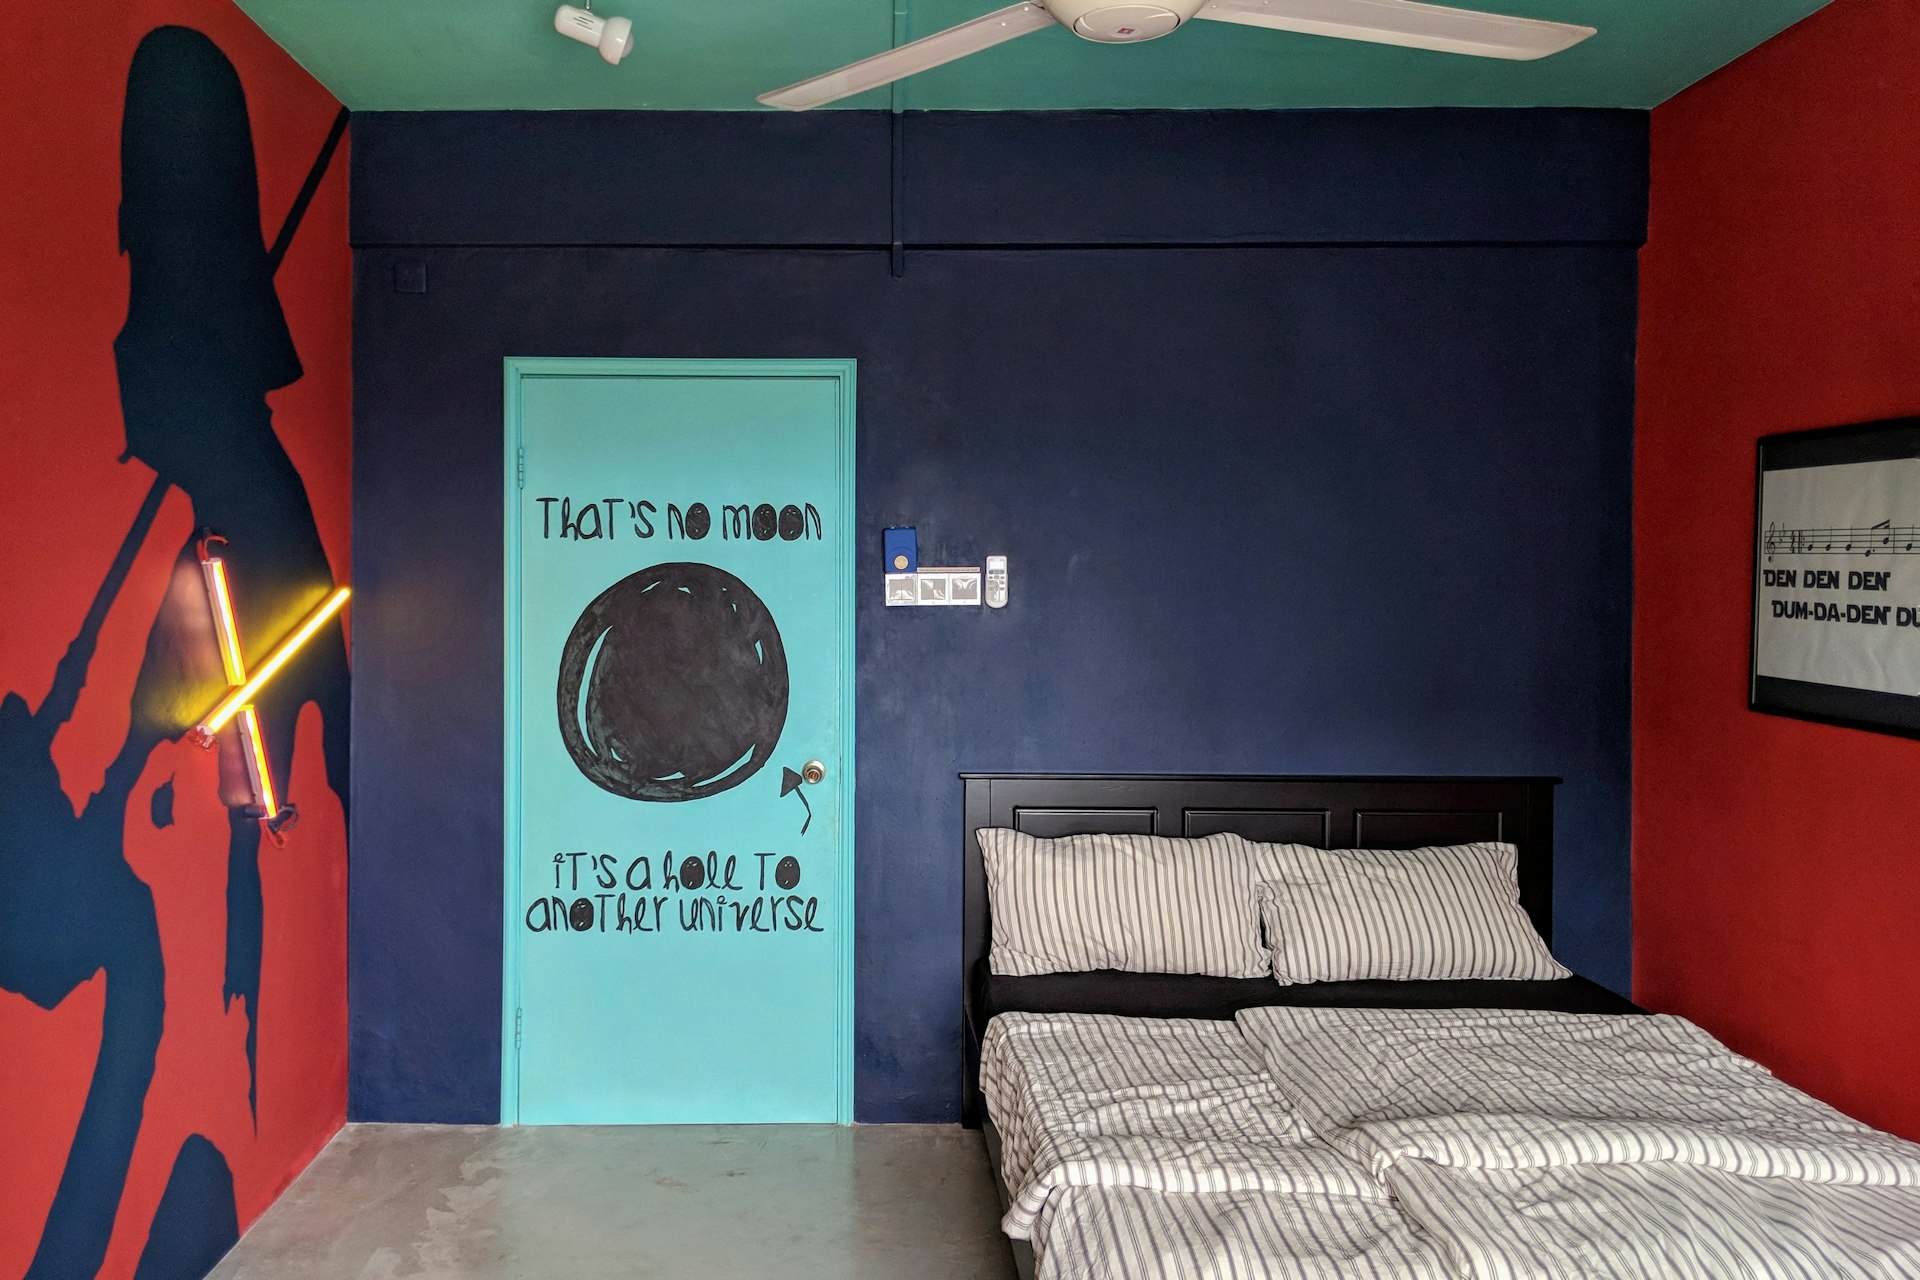 A picture of the bedroom in Kuala Lumpur with extensive Star Wars wall decorations